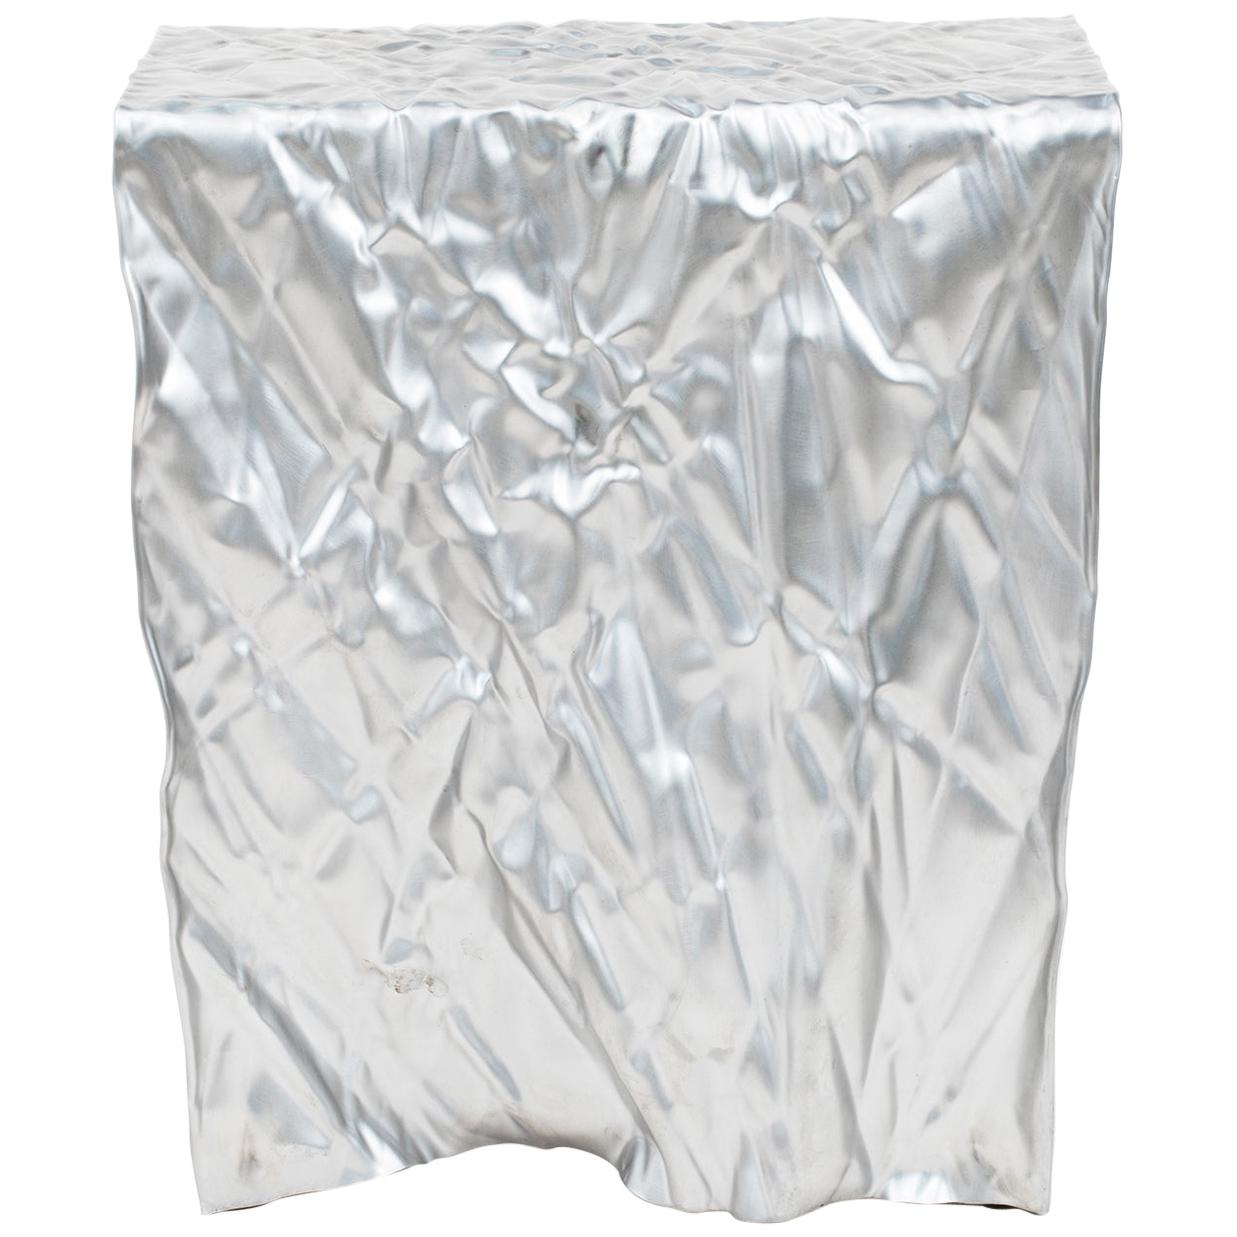 Christopher Prinz "Wrinkled Stool" in Stainless Steel (Raw) For Sale